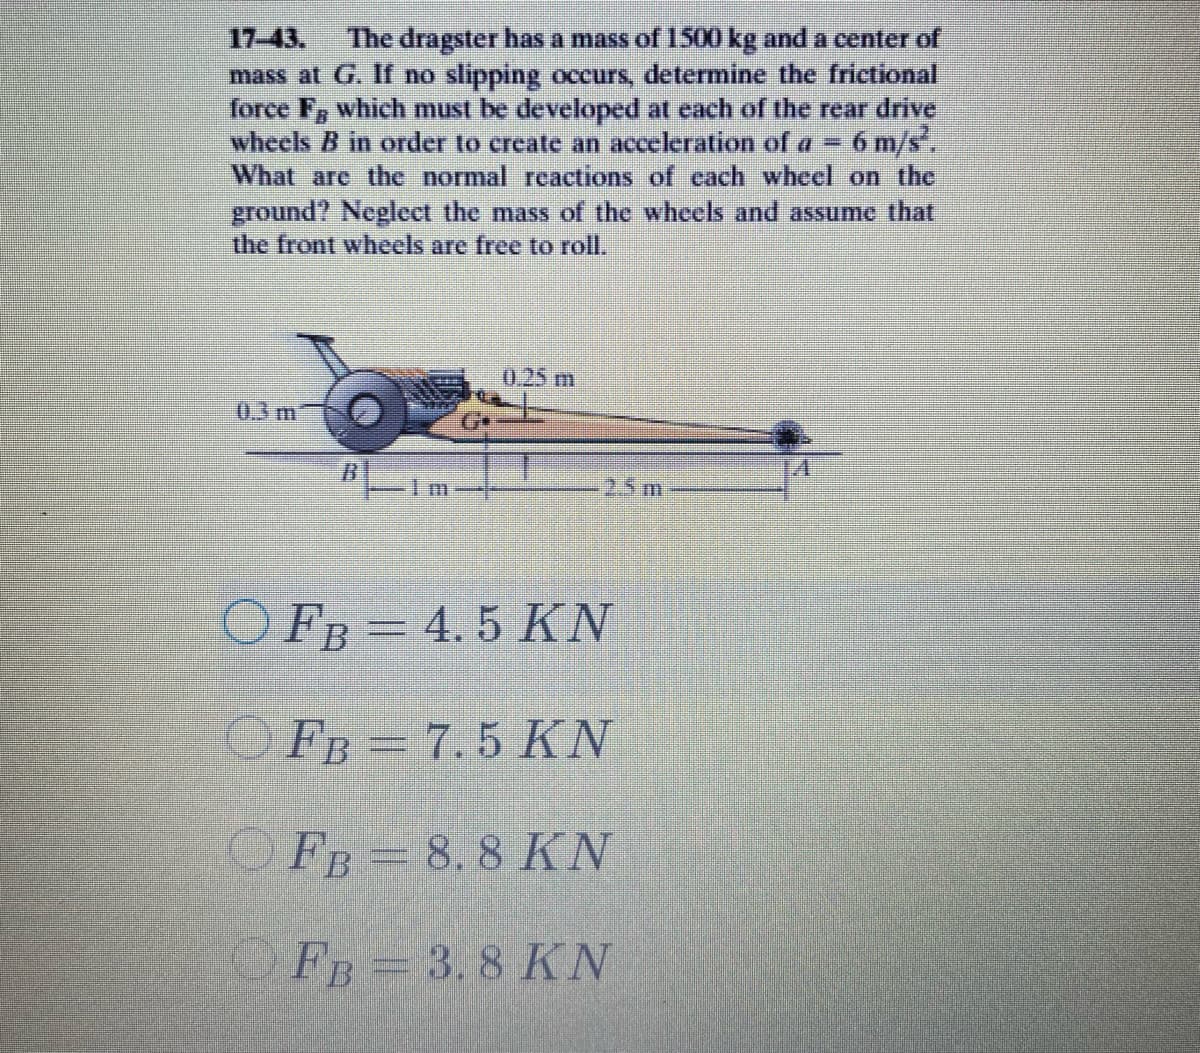 17-43.
The dragster has a mass of 1500kg and a center of
mass at G. If no slipping occurs, determine the frictional
force F, which must be developed at each of the rear drive
wheels B in order to create an acceleration of a = 6 m/s.
What are the normal reactions of cach wheel on the
ground? Neglect the mass of the wheels and assume that
the front wheels are free to roll.
0.25 m
0.3 m
25 m
O FB = 4. 5 KN
OFB = 7.5 KN
OFB= 8, 8 KN
O FB= 3.8 KN
